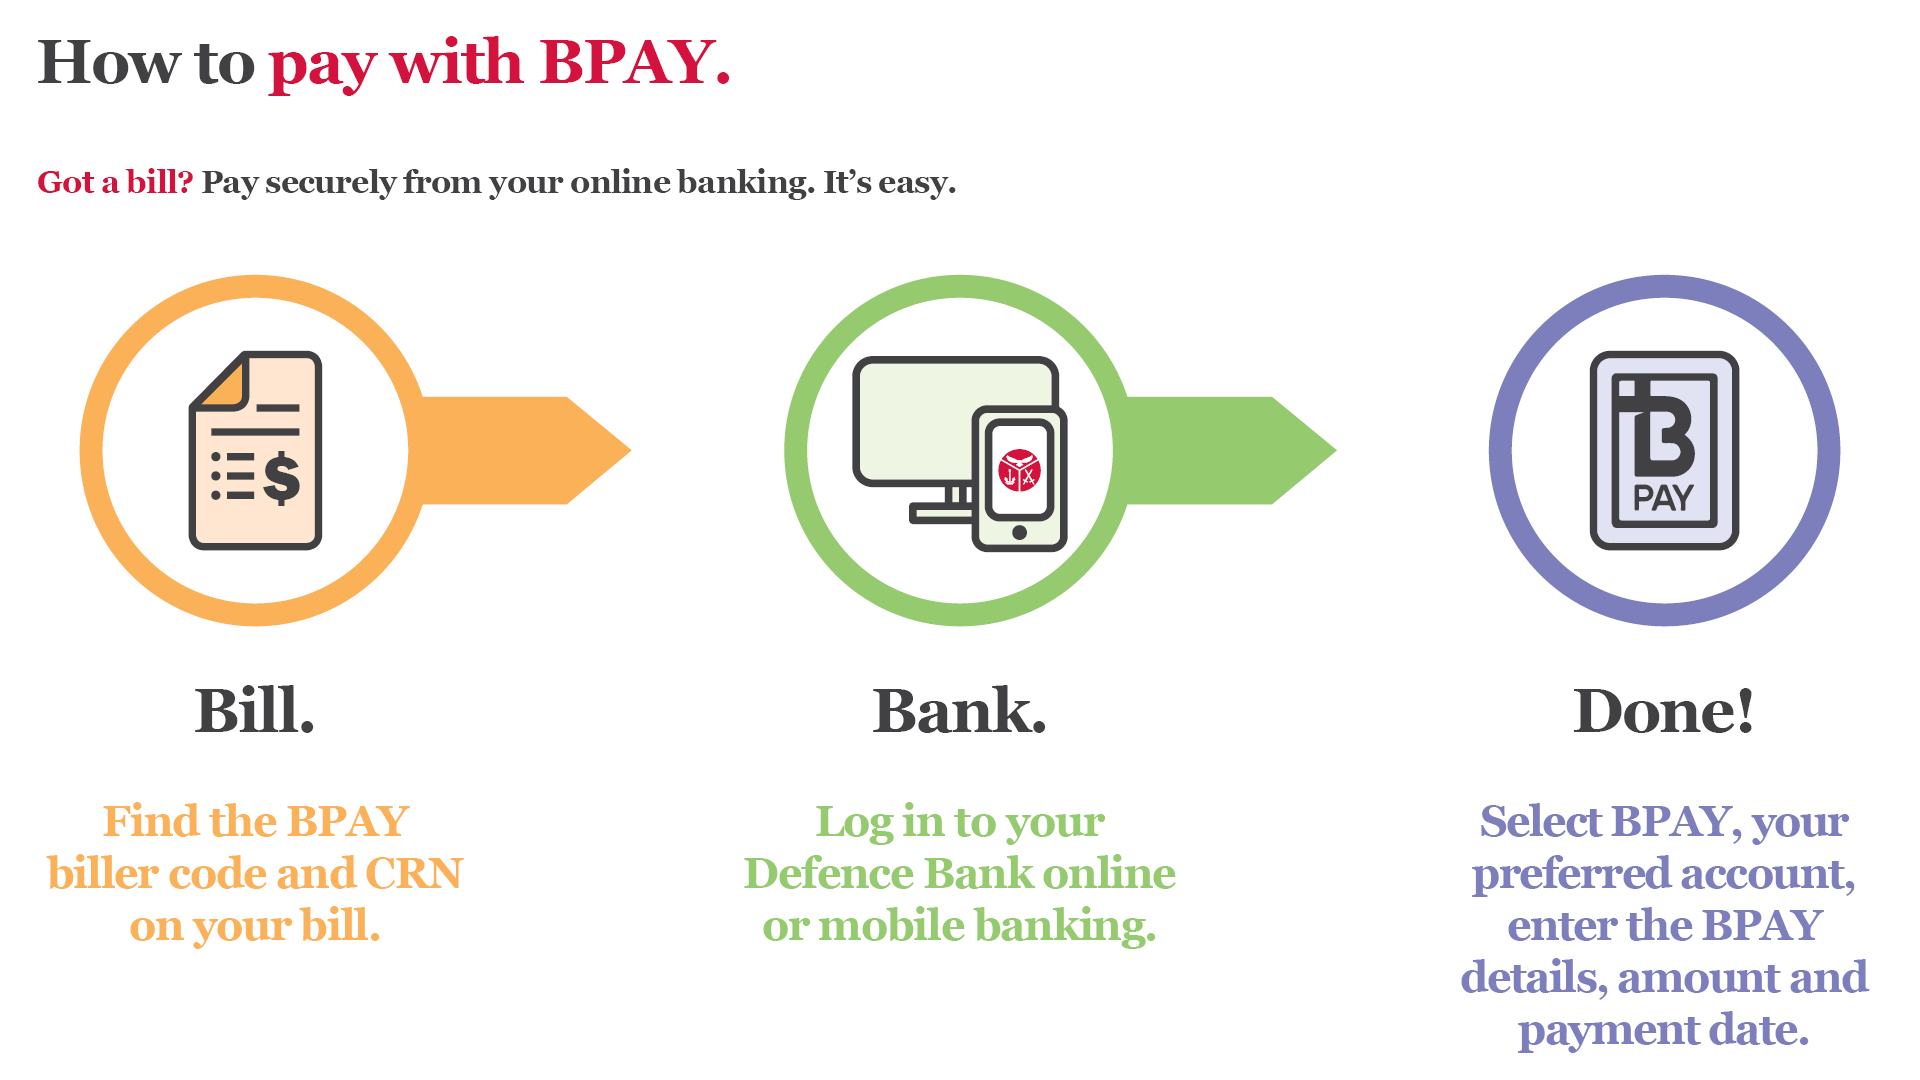 How to pay with BPAY. Got a bill? Pay securely from your online banking. It's easy. Bill. Find the BPAY biller code and CRN on your bill. Bank. Log in to your Defence Bank online or mobile banking. Done! Select BPAY, your preferred account, enter the BPAY details, amount and payment date.